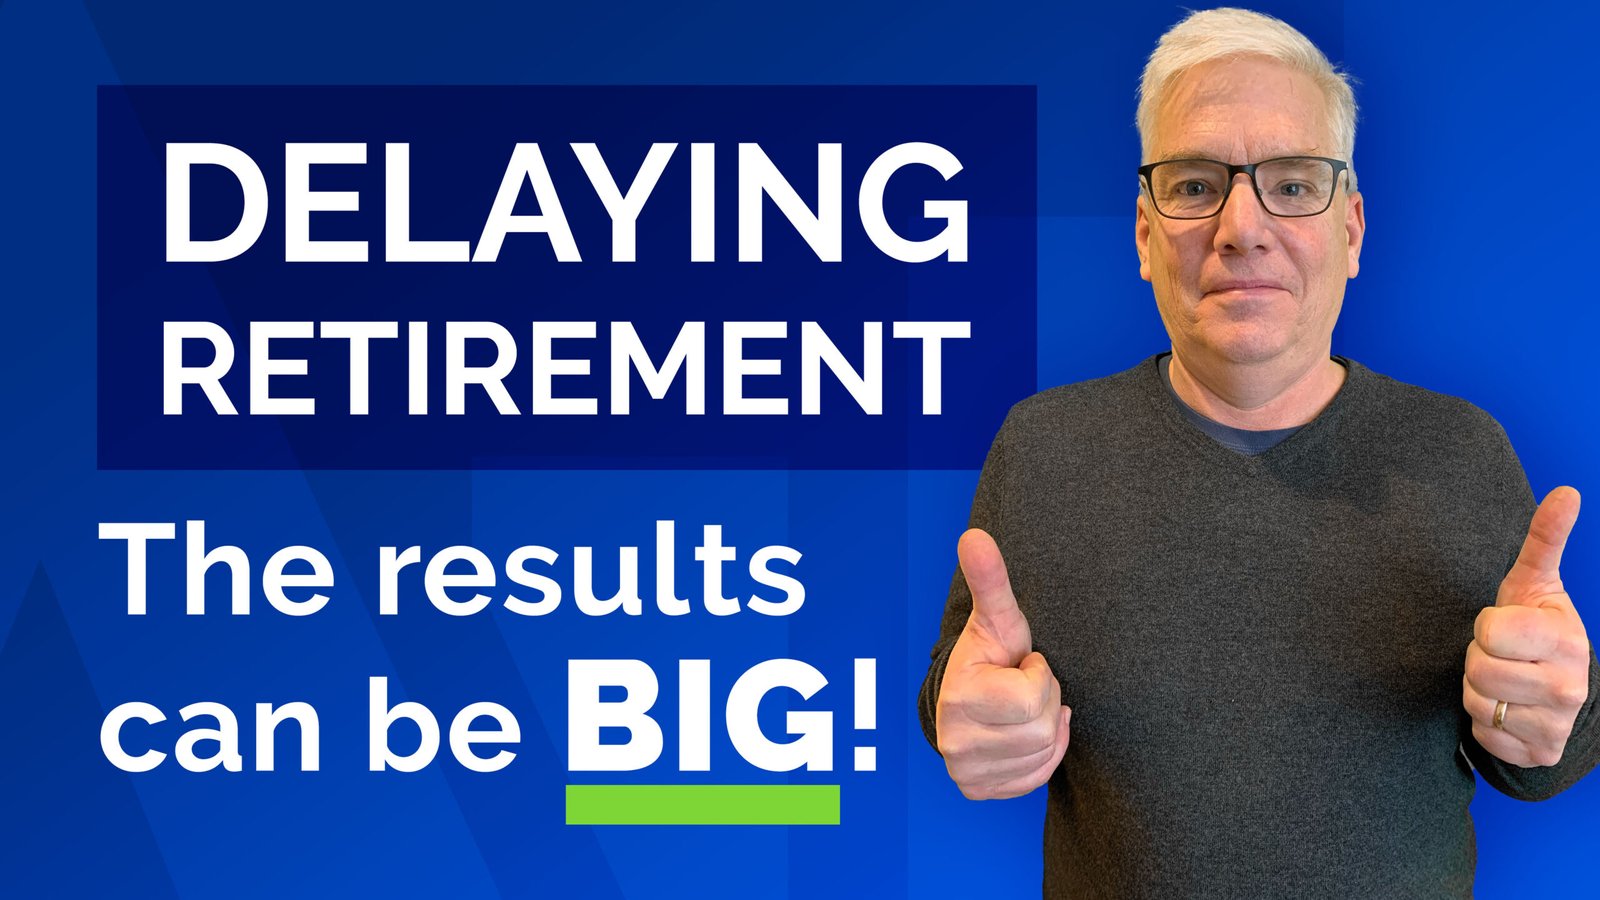 Delaying Retirement? The results can be big!